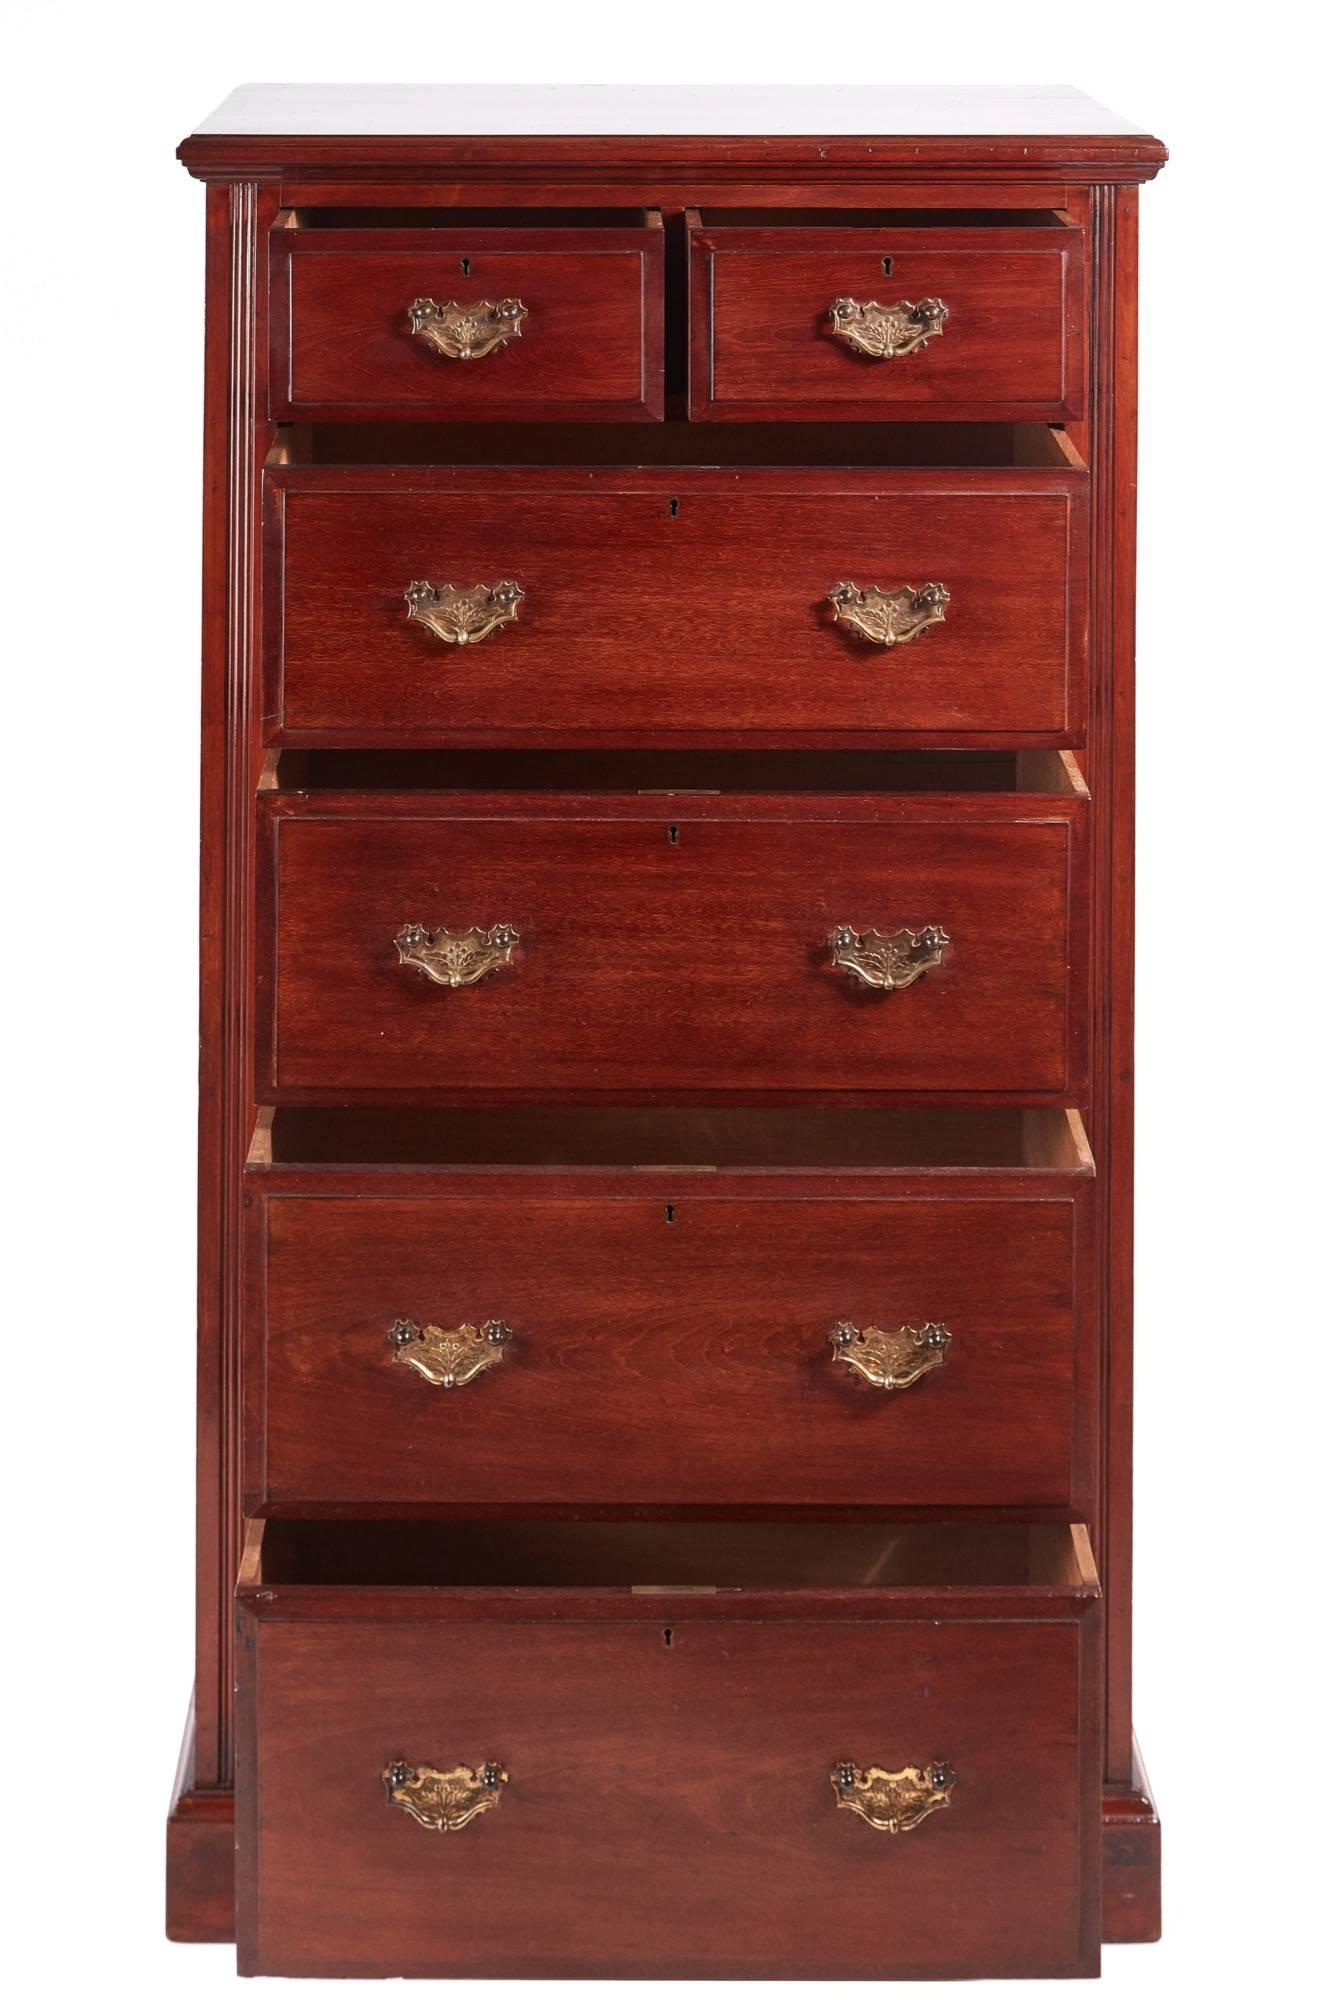 Antique walnut chest of drawers, with a lovely walnut top, two short and four long drawers all with original brass handles and thumb moulded edge, reeded sides and lovely panelled ends, standing on a plinth base.